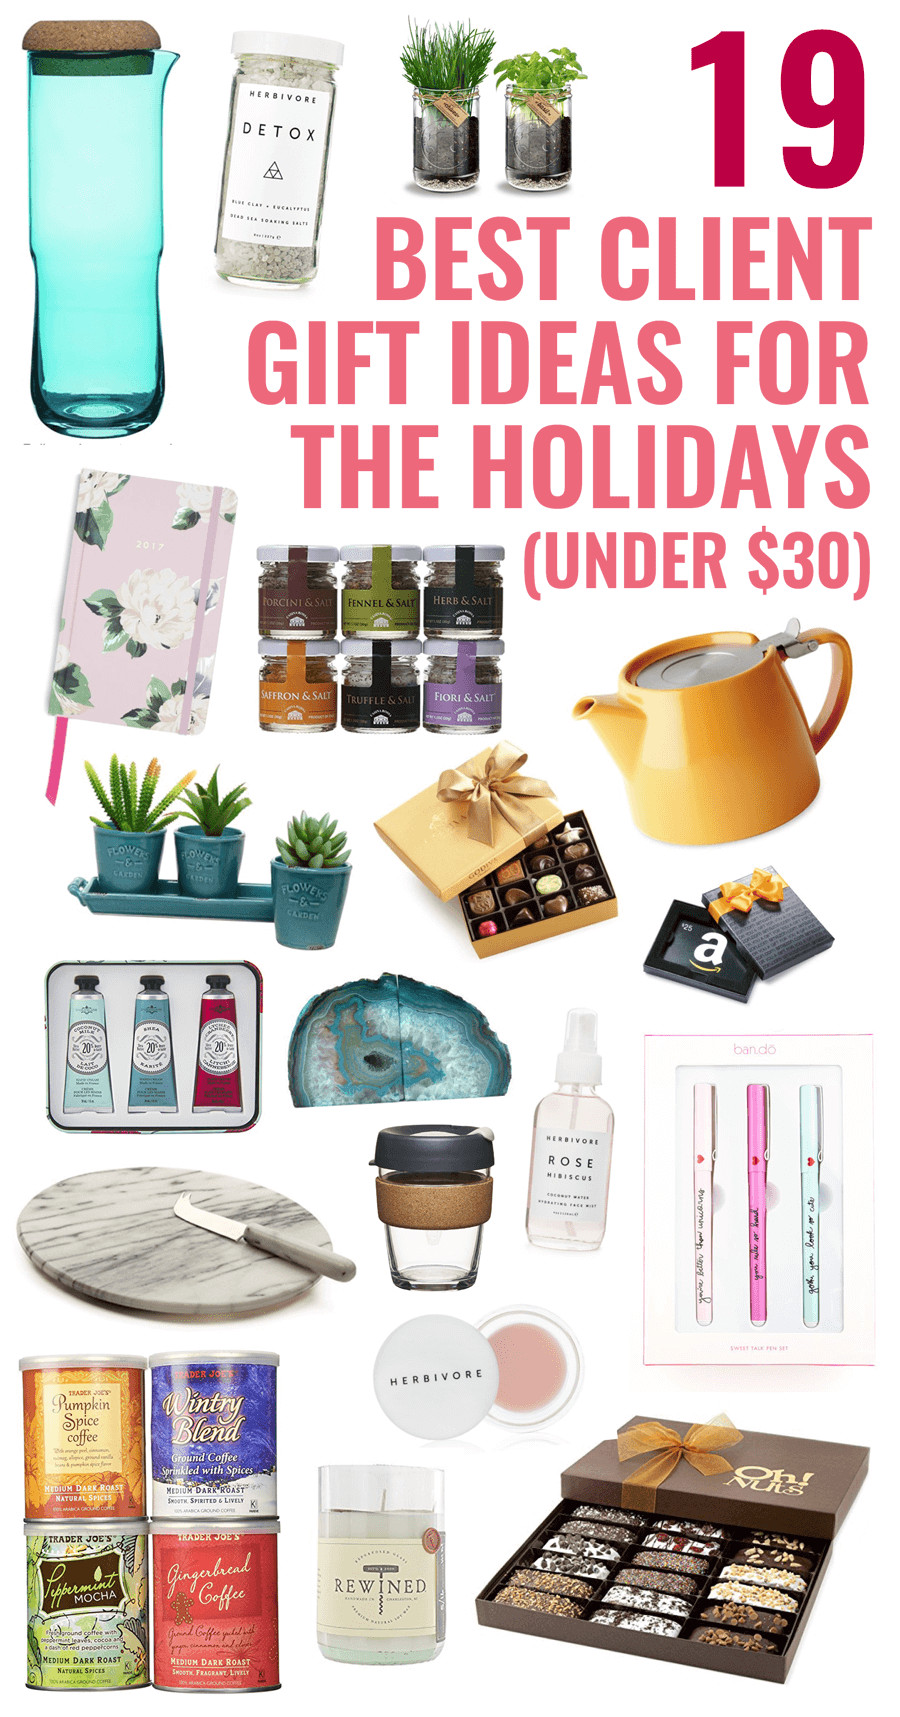 Corporate Holiday Gift Ideas For Clients
 19 Best Client Gift Ideas for the Holidays under $30